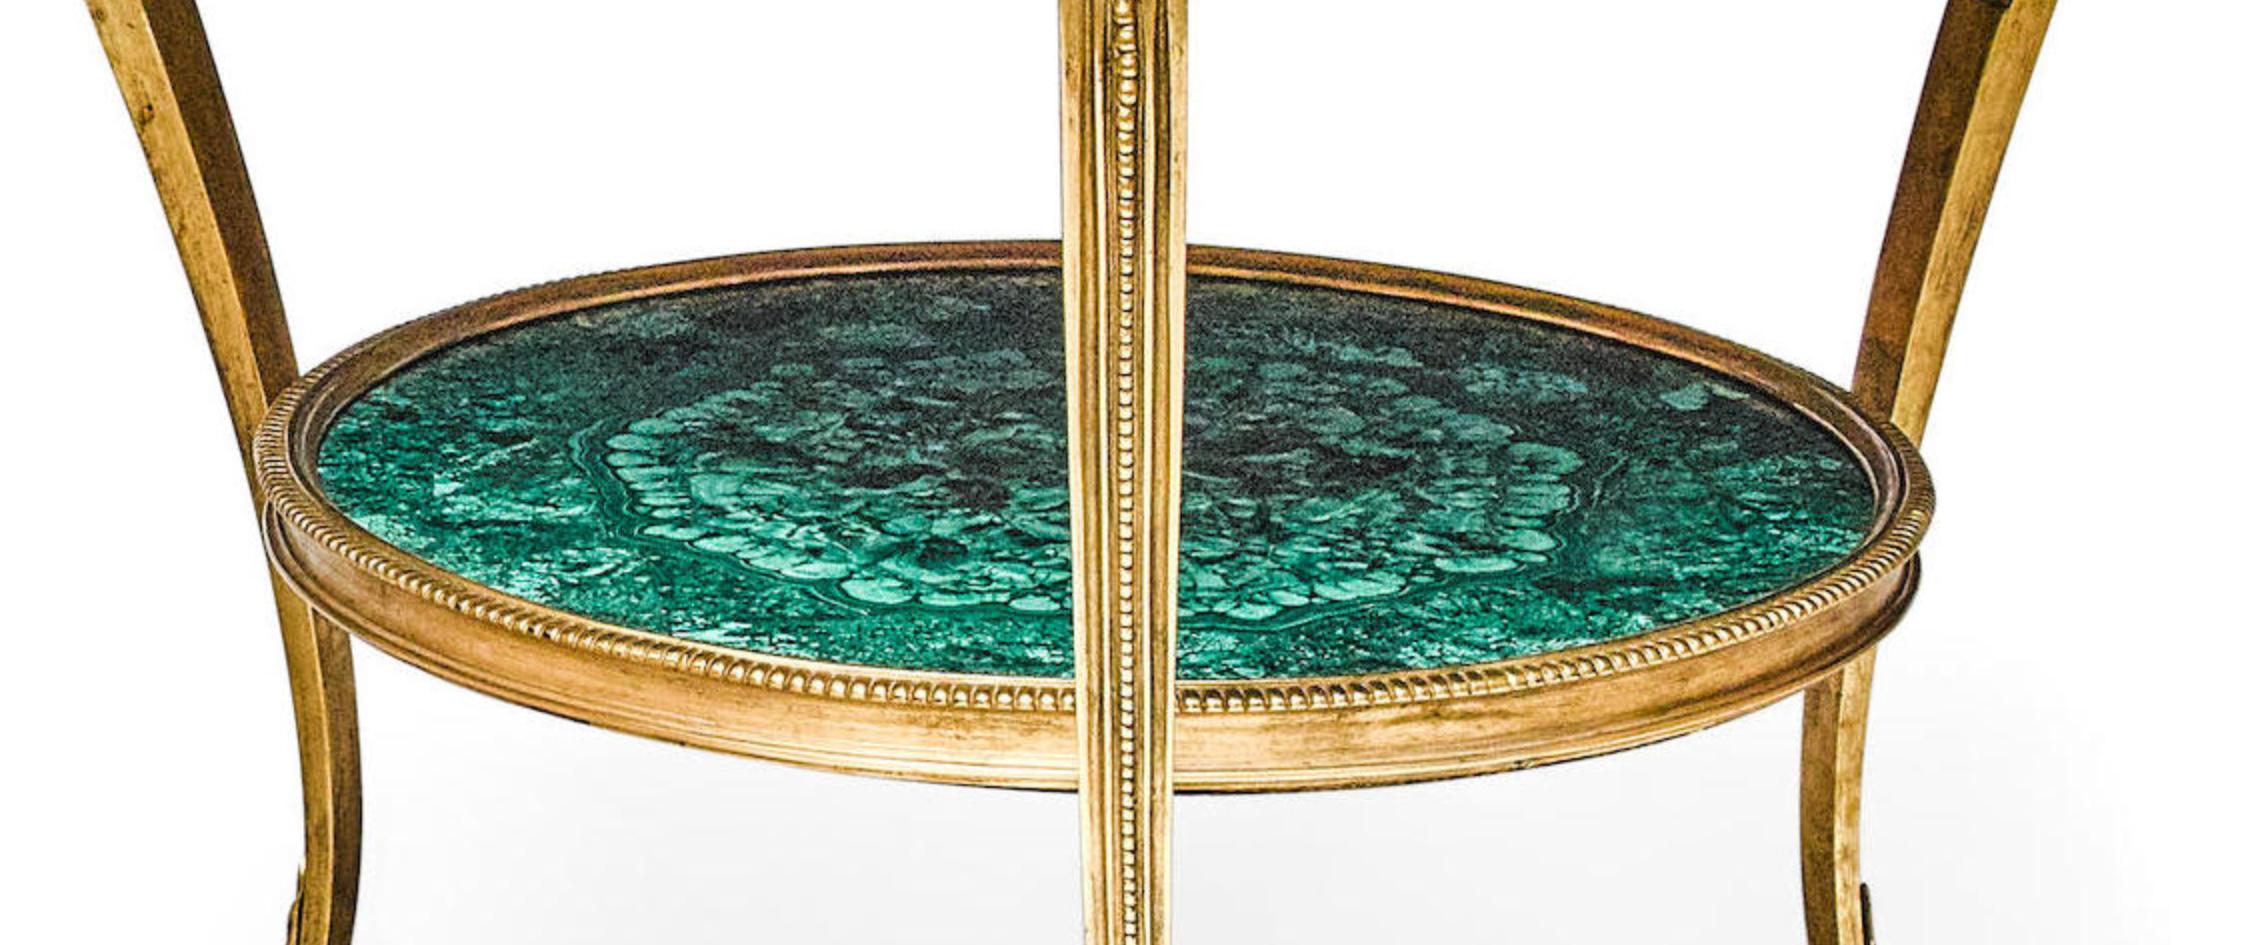 French Fantastic Pair of Louis XVI Style Gilt Bronze and Malachite Gueridons Tables